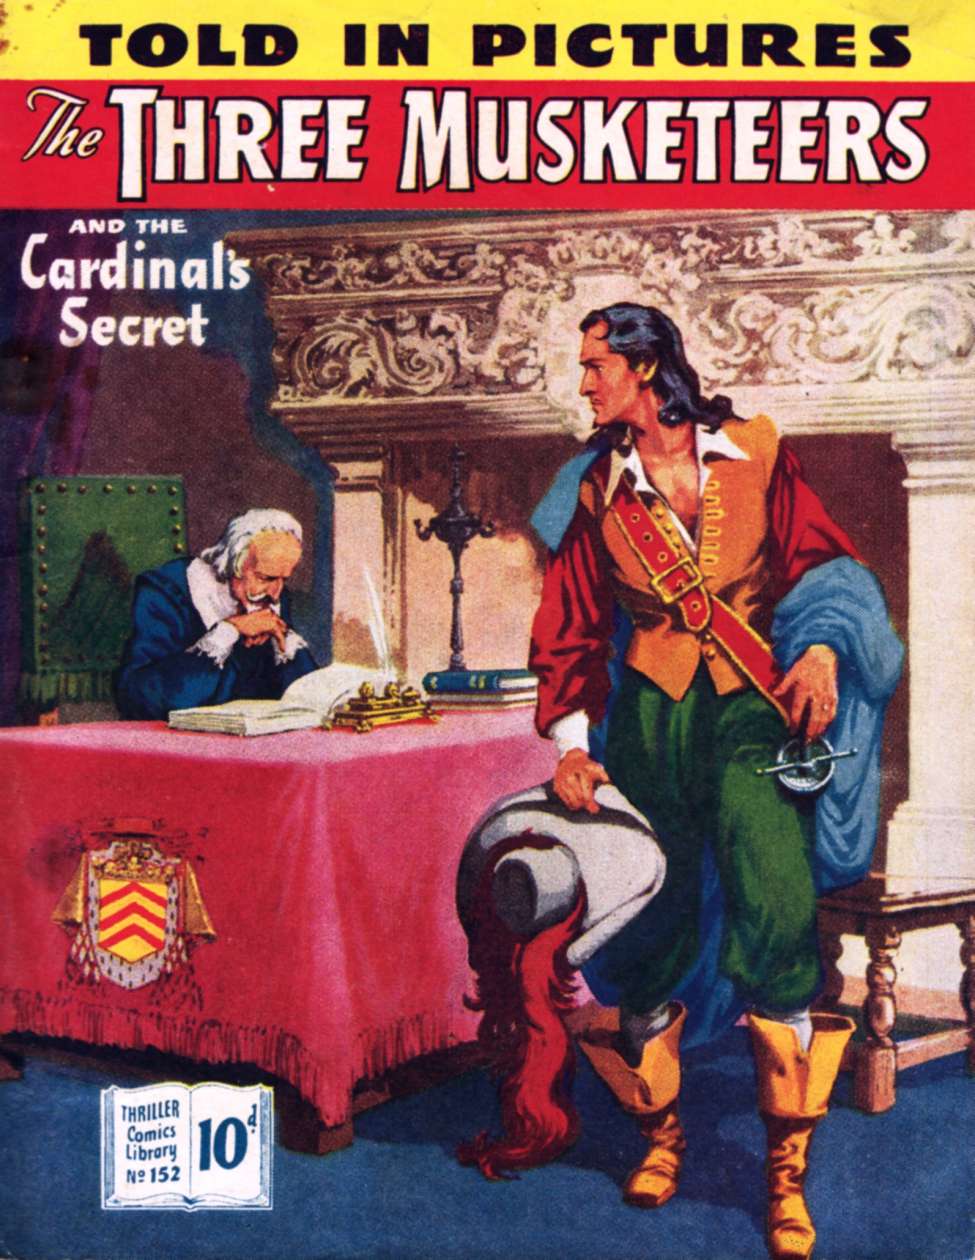 Book Cover For Thriller Comics Library 152 - The Cardinal's Secret